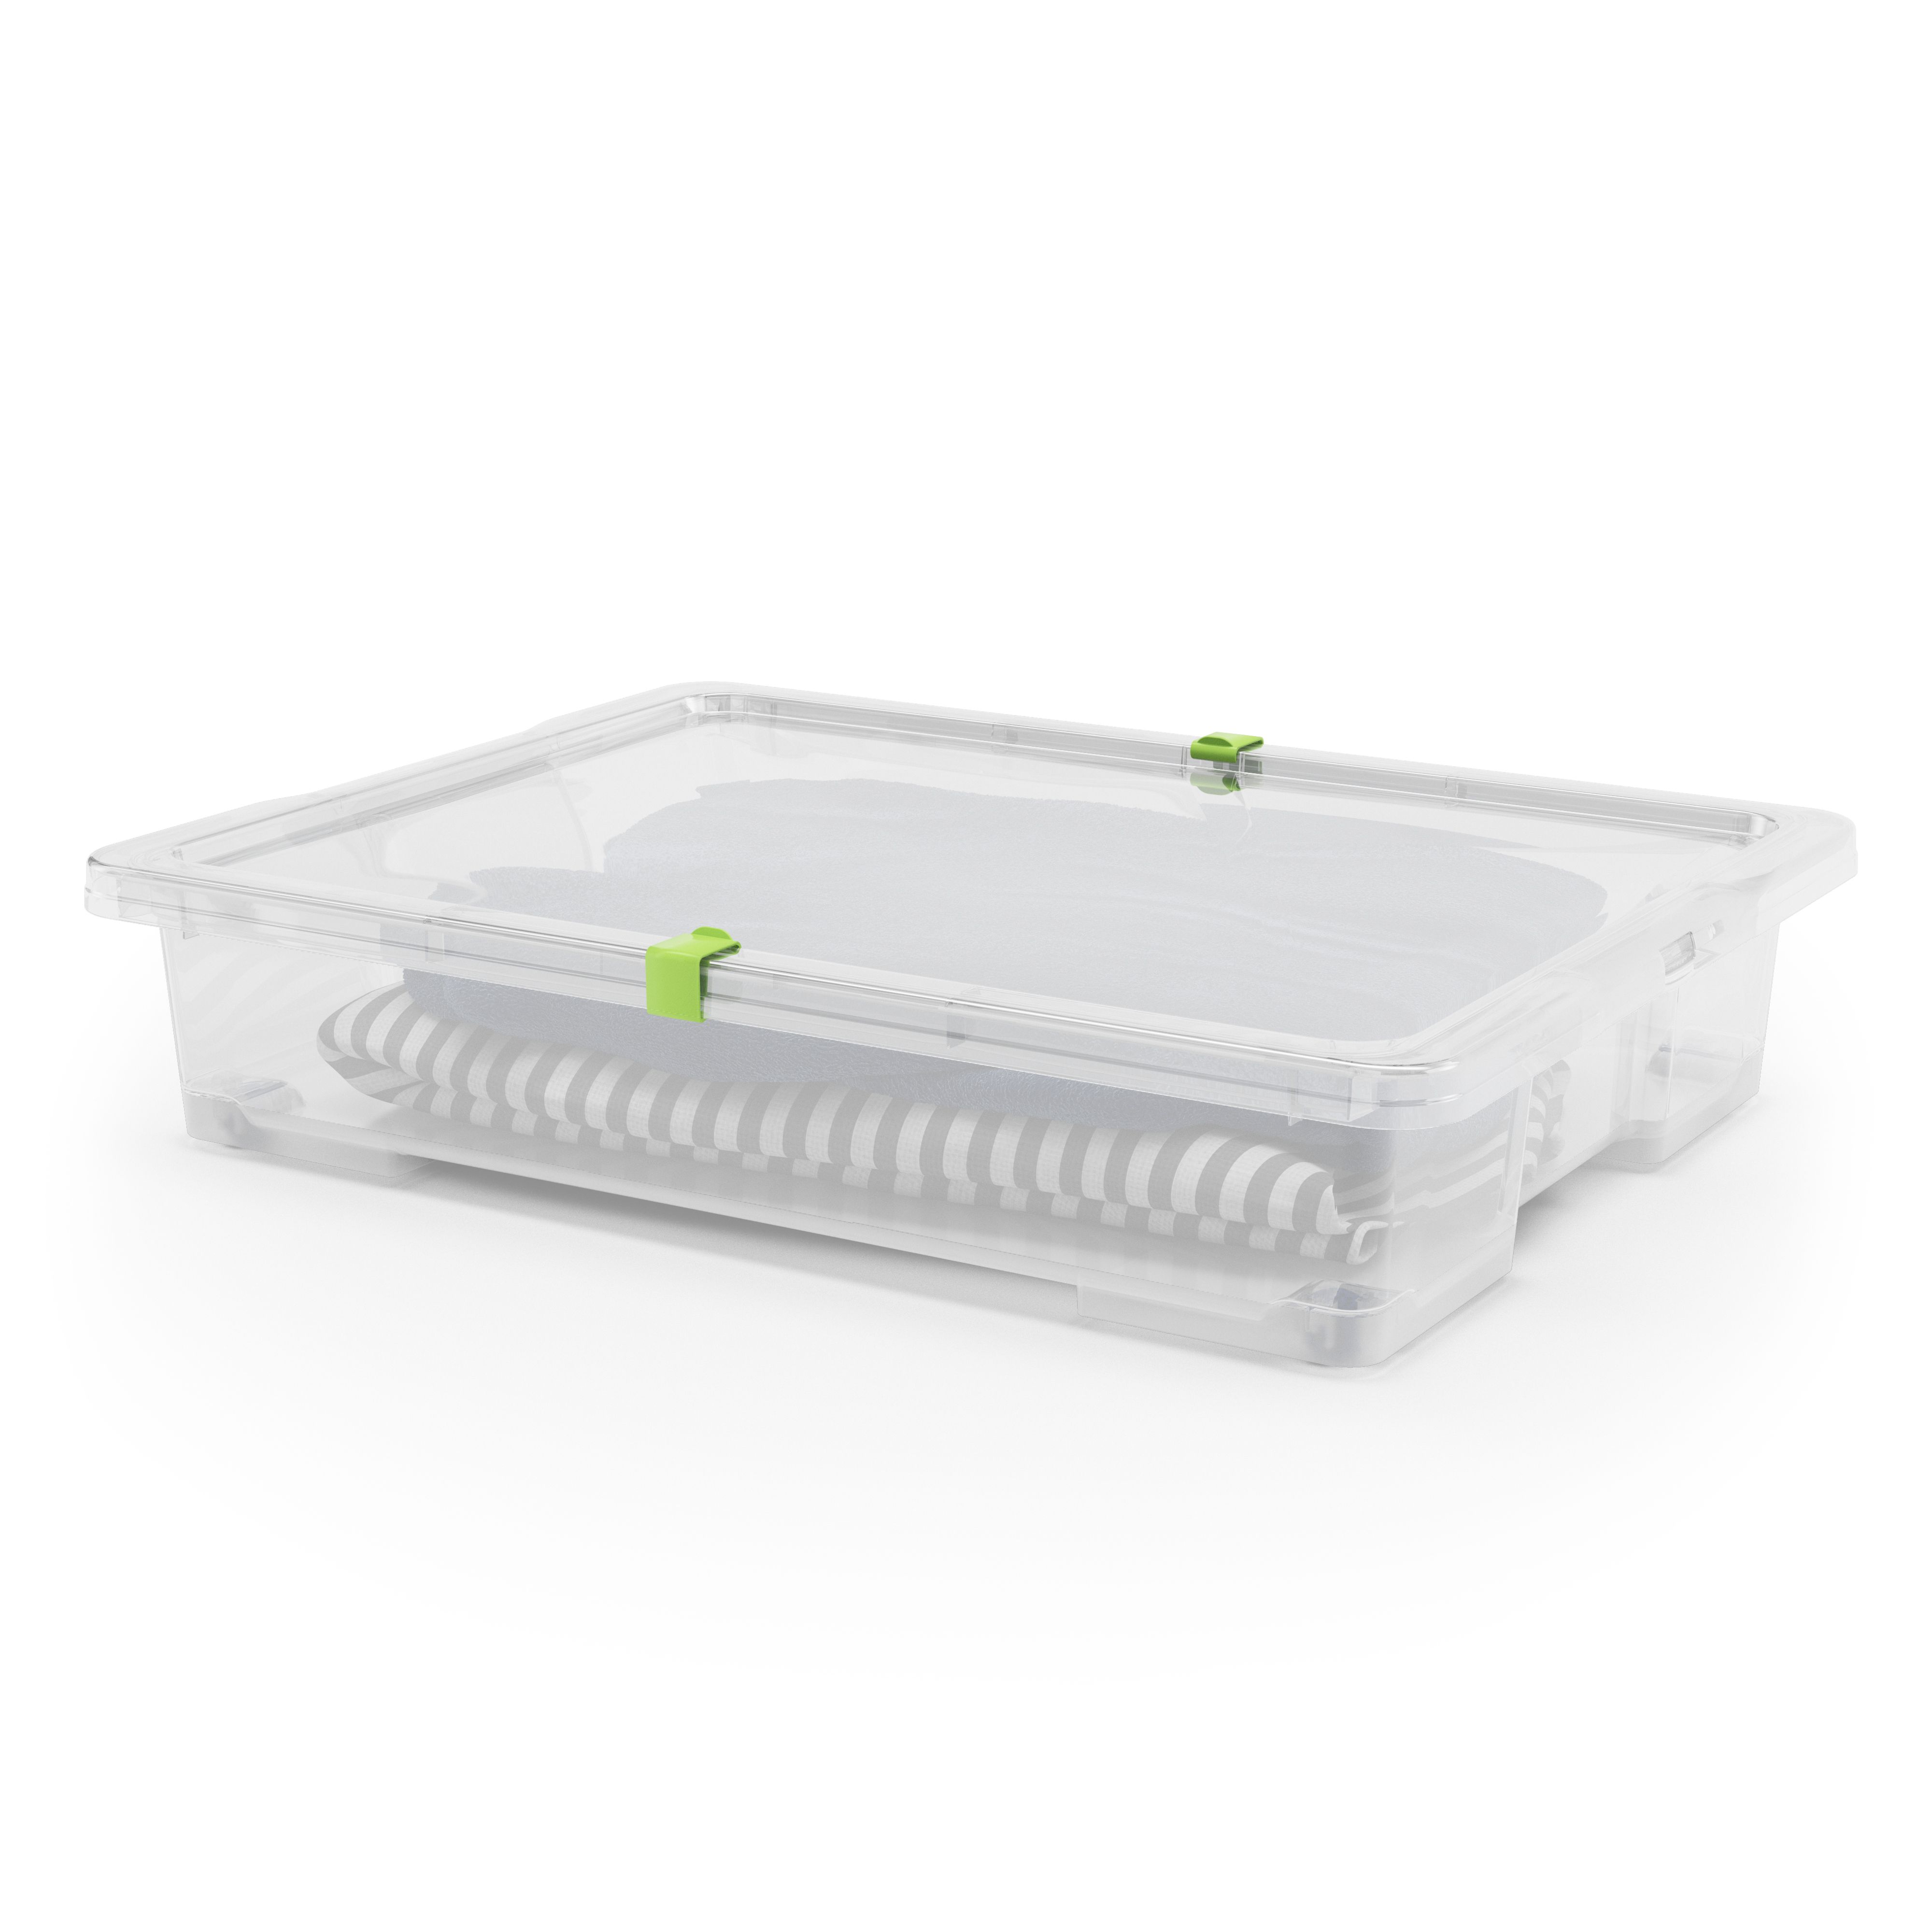 type A Clarity Transparent Under the Bed Storage Box with Lid, 50-L